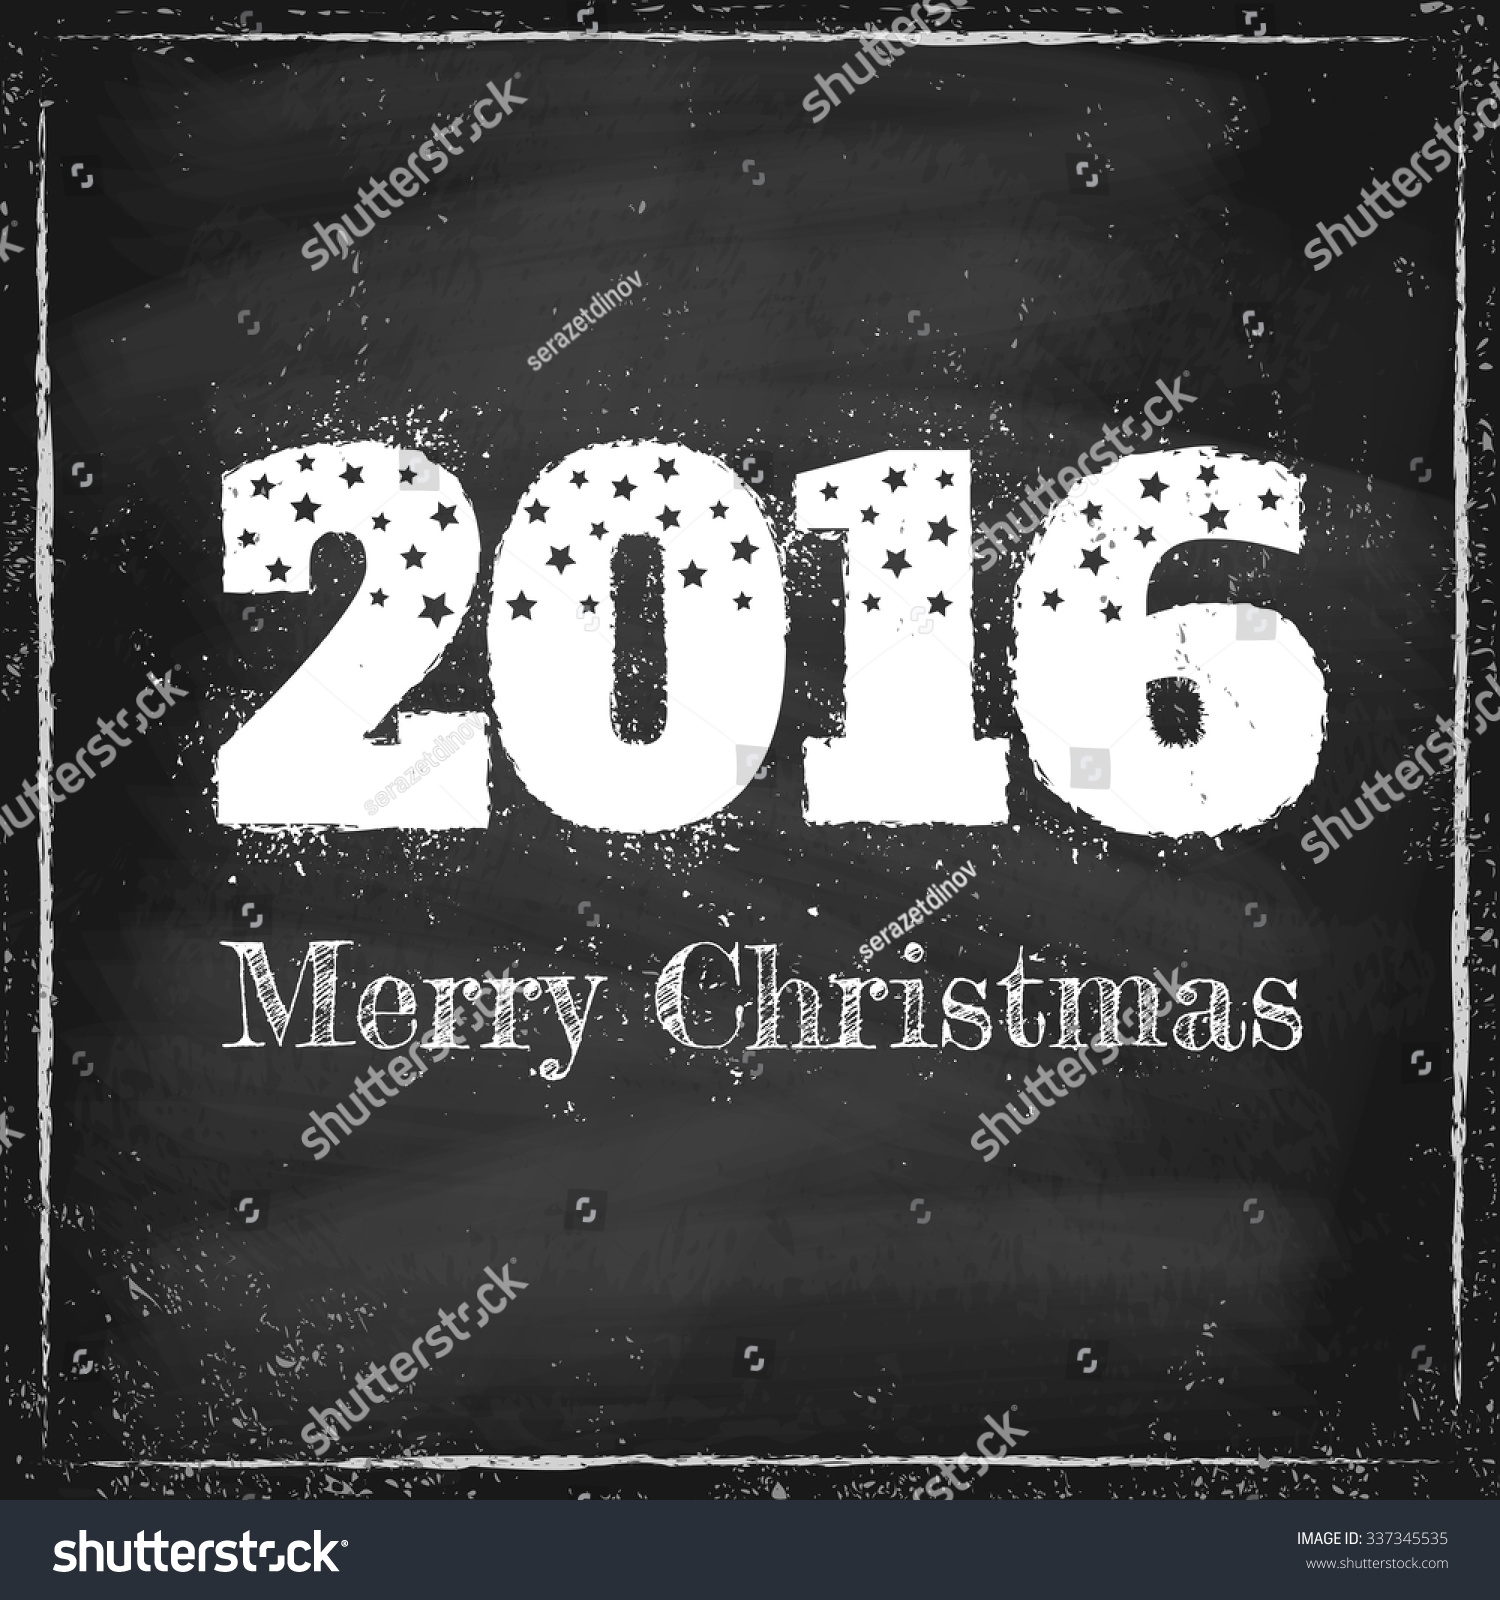 Retro illustration of a 2016 on chalkboard for christmas #337345535